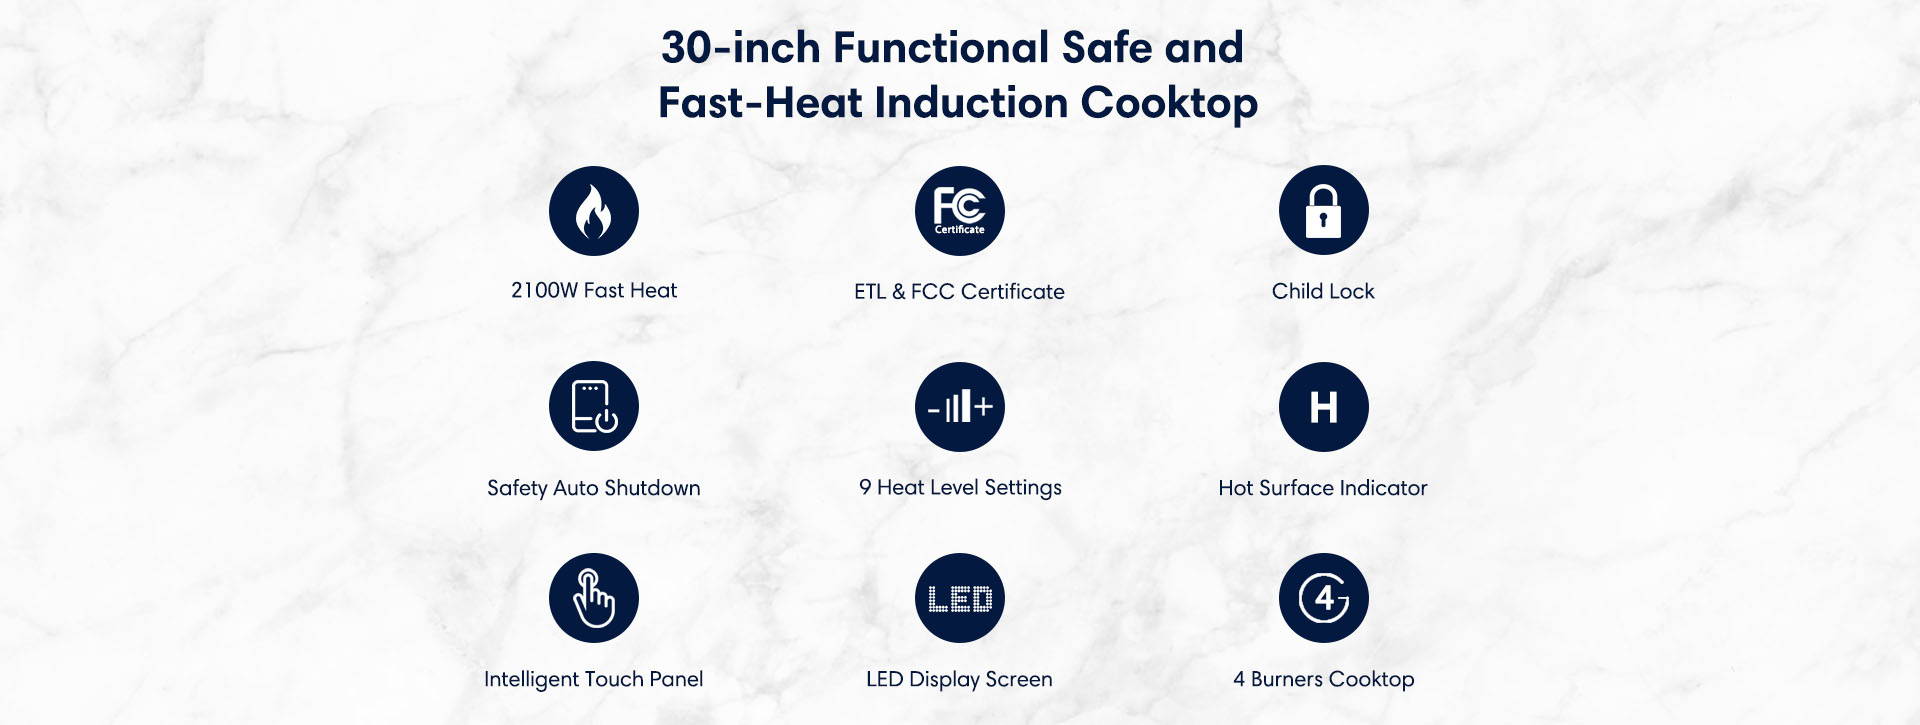 30 inch Functional Safe and Fast Heat Induction Cooktop